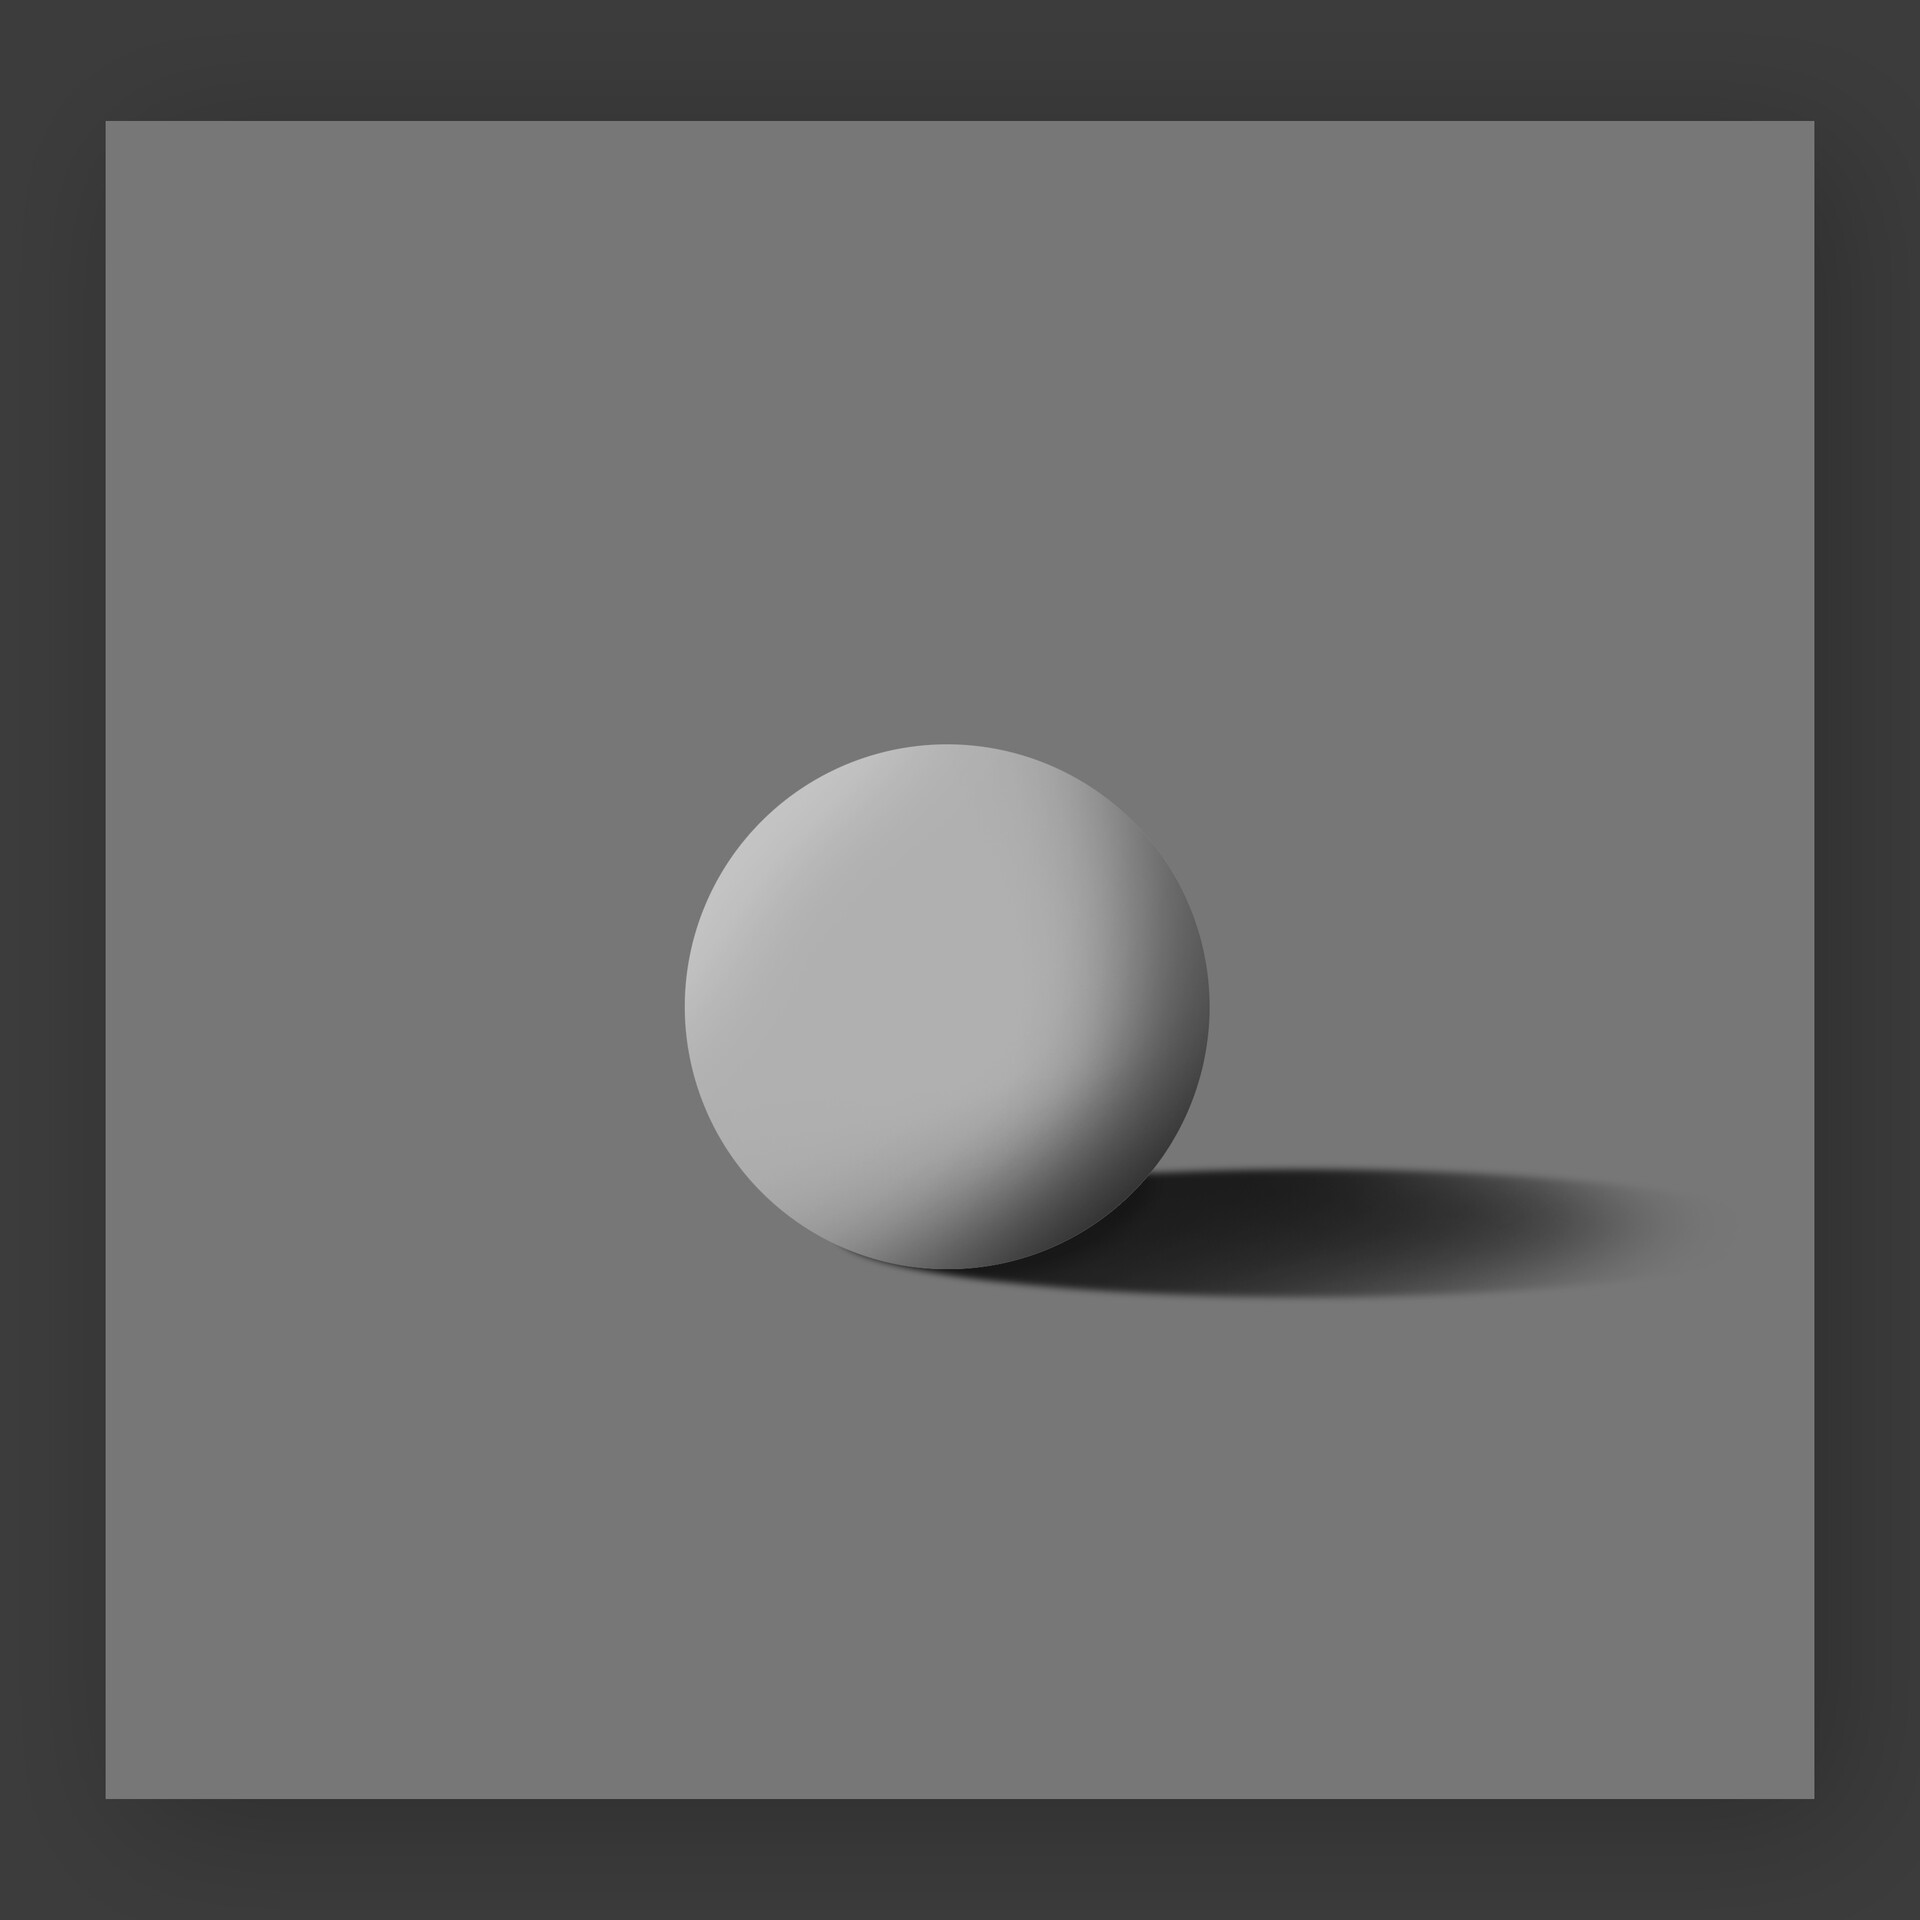 ArtStation - Ball With Shadow PSD free